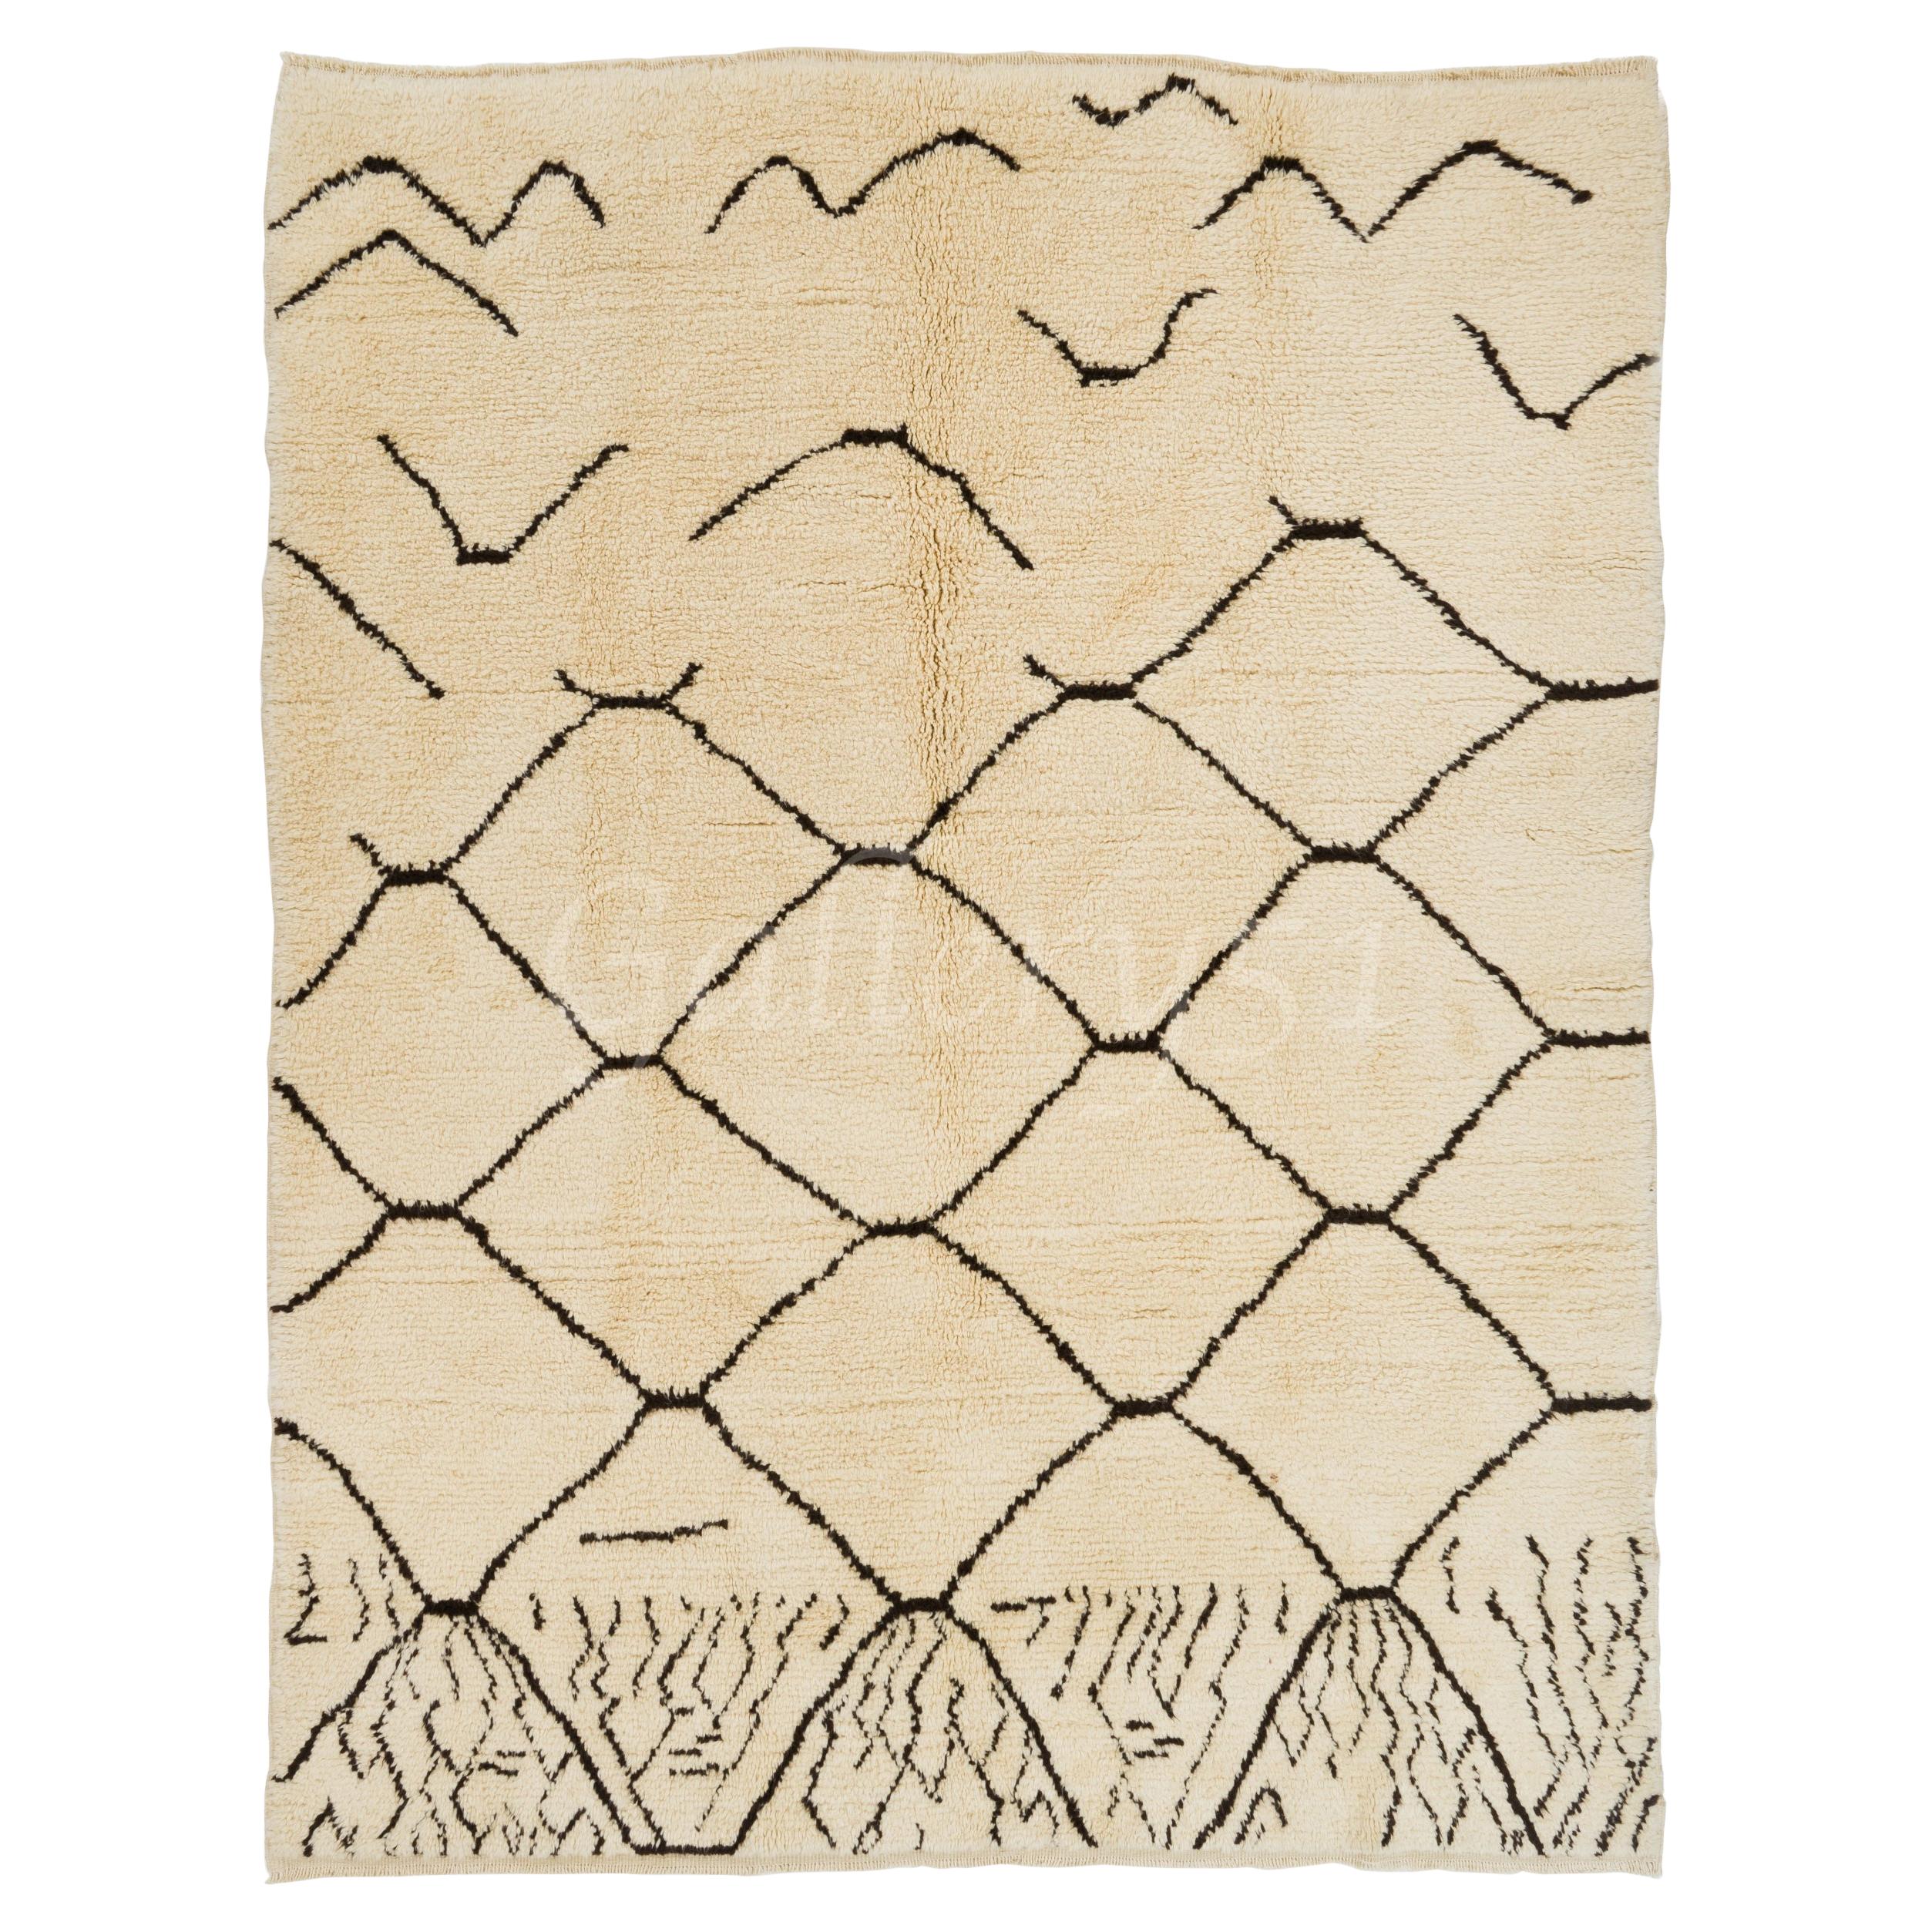 10x14 ft Contemporary Moroccan Rug. 100% Natural Un-Dyed Wool, Custom Options Av